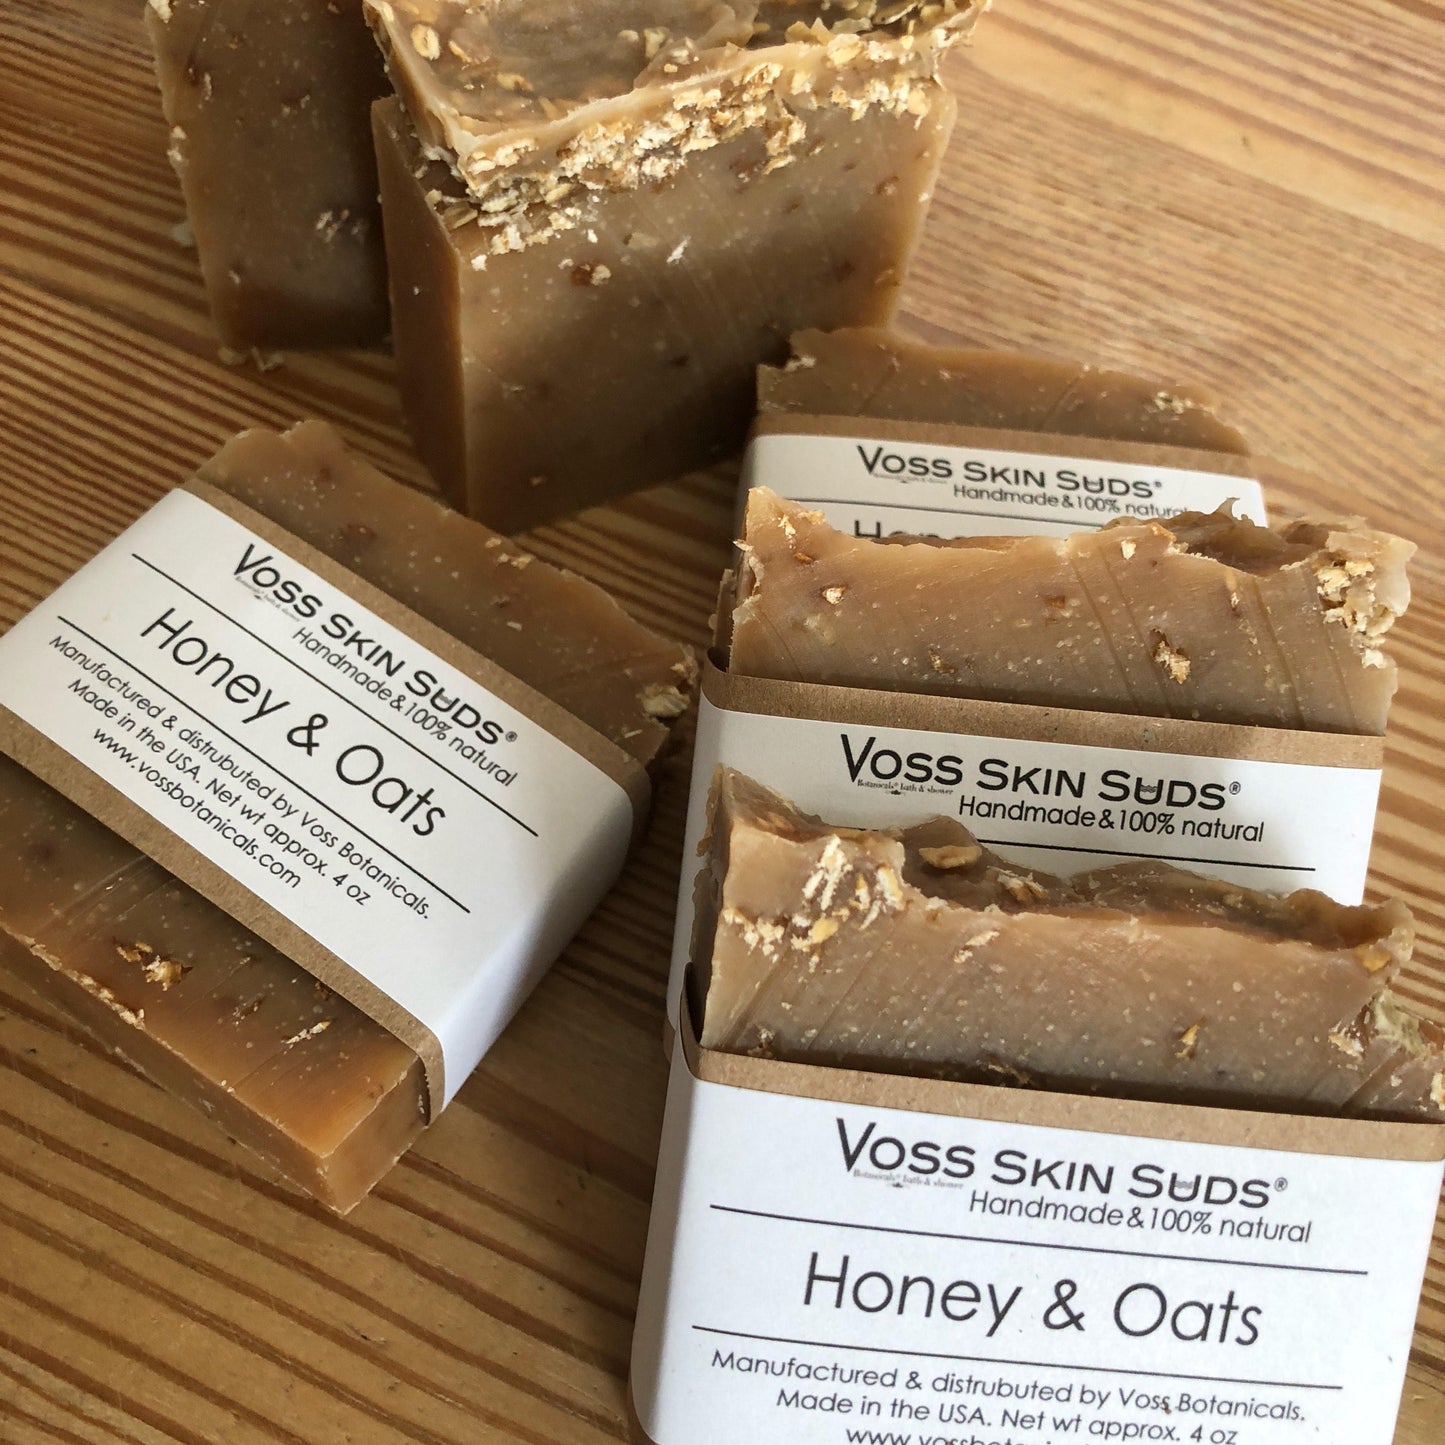 Honey and Oats Soap PRODUCT FOOTPRINTS Natural ingredients Phthalate, Sulfate, Petroleum & Paraben Free Vegan Free of Synthetic Fragrances Free of Synthetic Dyes GMO & Gluten-free Non Toxic Handmade Sustainable Innovation Made in the USA Cruelty Free Zero Waste Low Carbon Footprint eco friendly   Holiday care package gift box gift for her relaxation gift self care box self care gift box spa gift box spa gift set thank you gift box birthday gift new mom gift relaxing bath set spa gift set spa kit